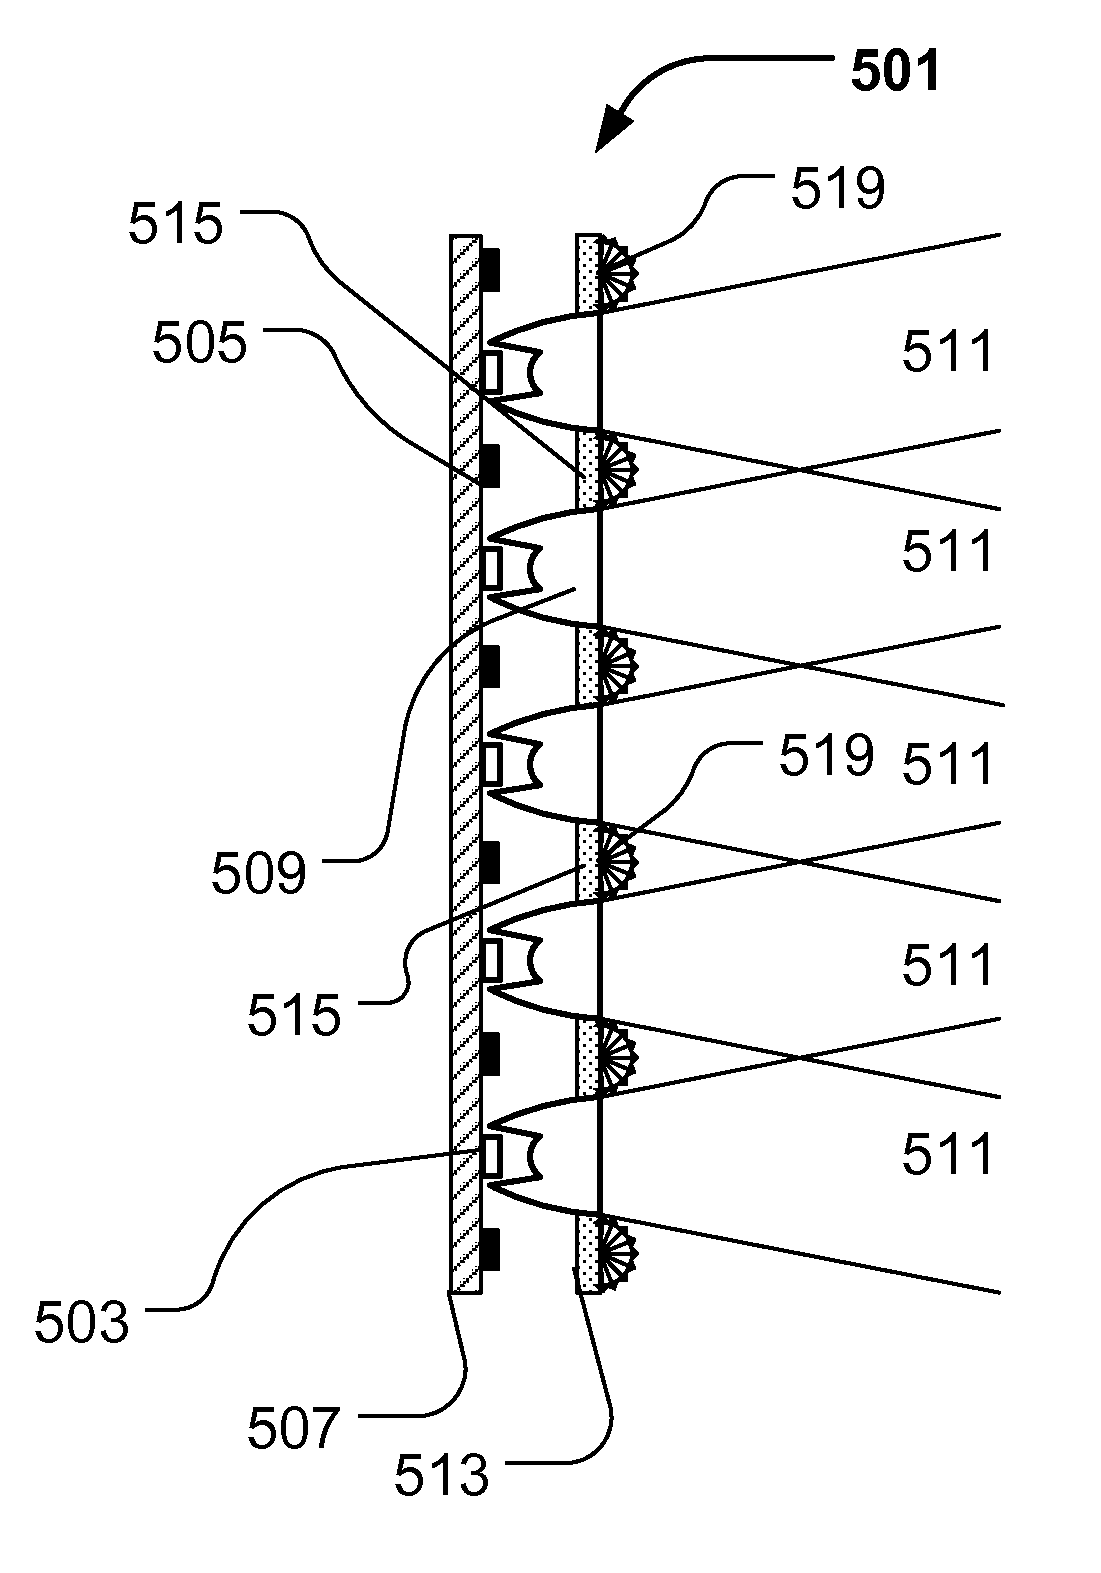 Light Fixture With Background Display Using Diffuse Pixels Between Nondiffuse Light Sources